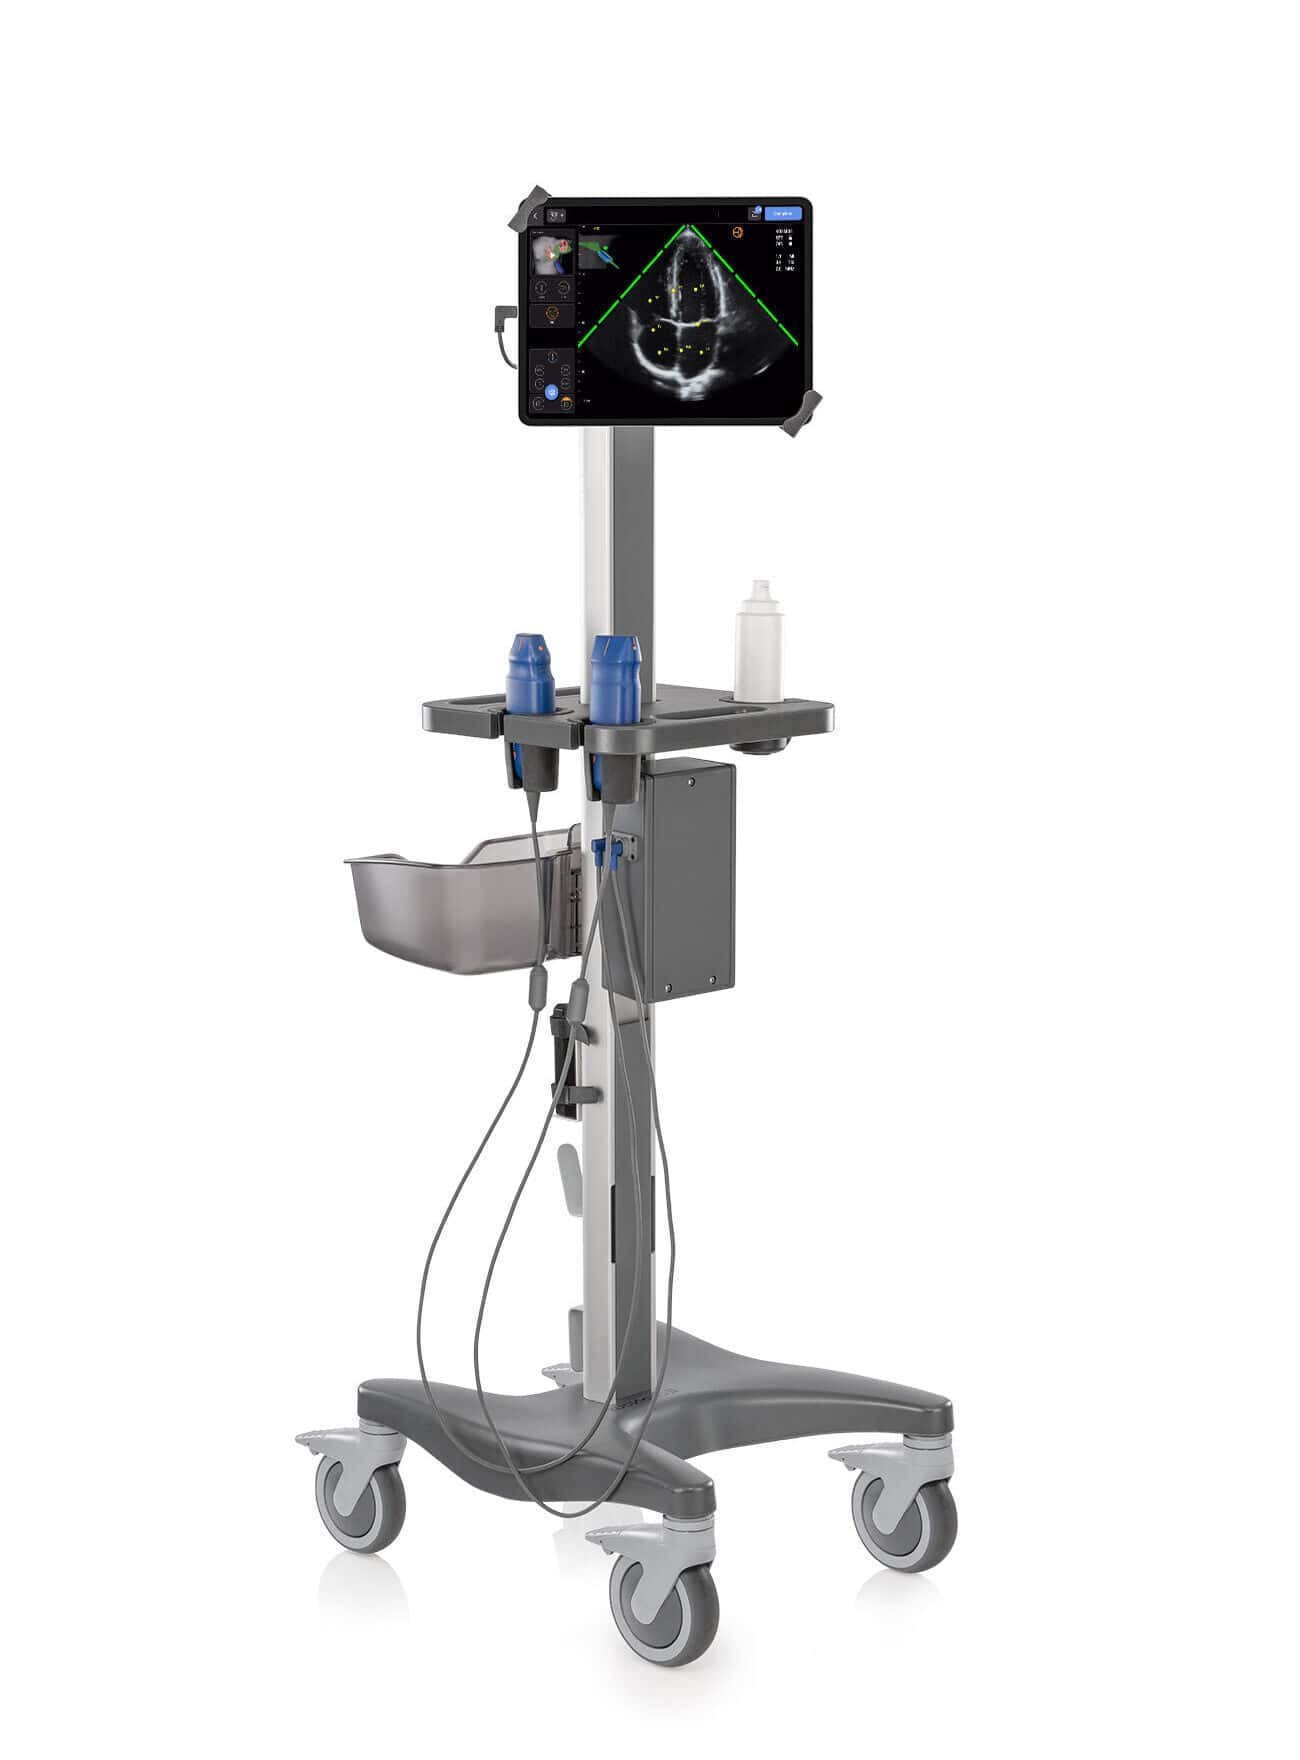 Kosmos Plus provides advanced POCUS capabilities at an unheard-of cost under $20,000. Everything is included — cutting-edge AI, advanced Doppler features, multiple transducers, a 12.9-inch iPad® Pro and medical-grade stand — you’ll have what you need to get started right out of the box